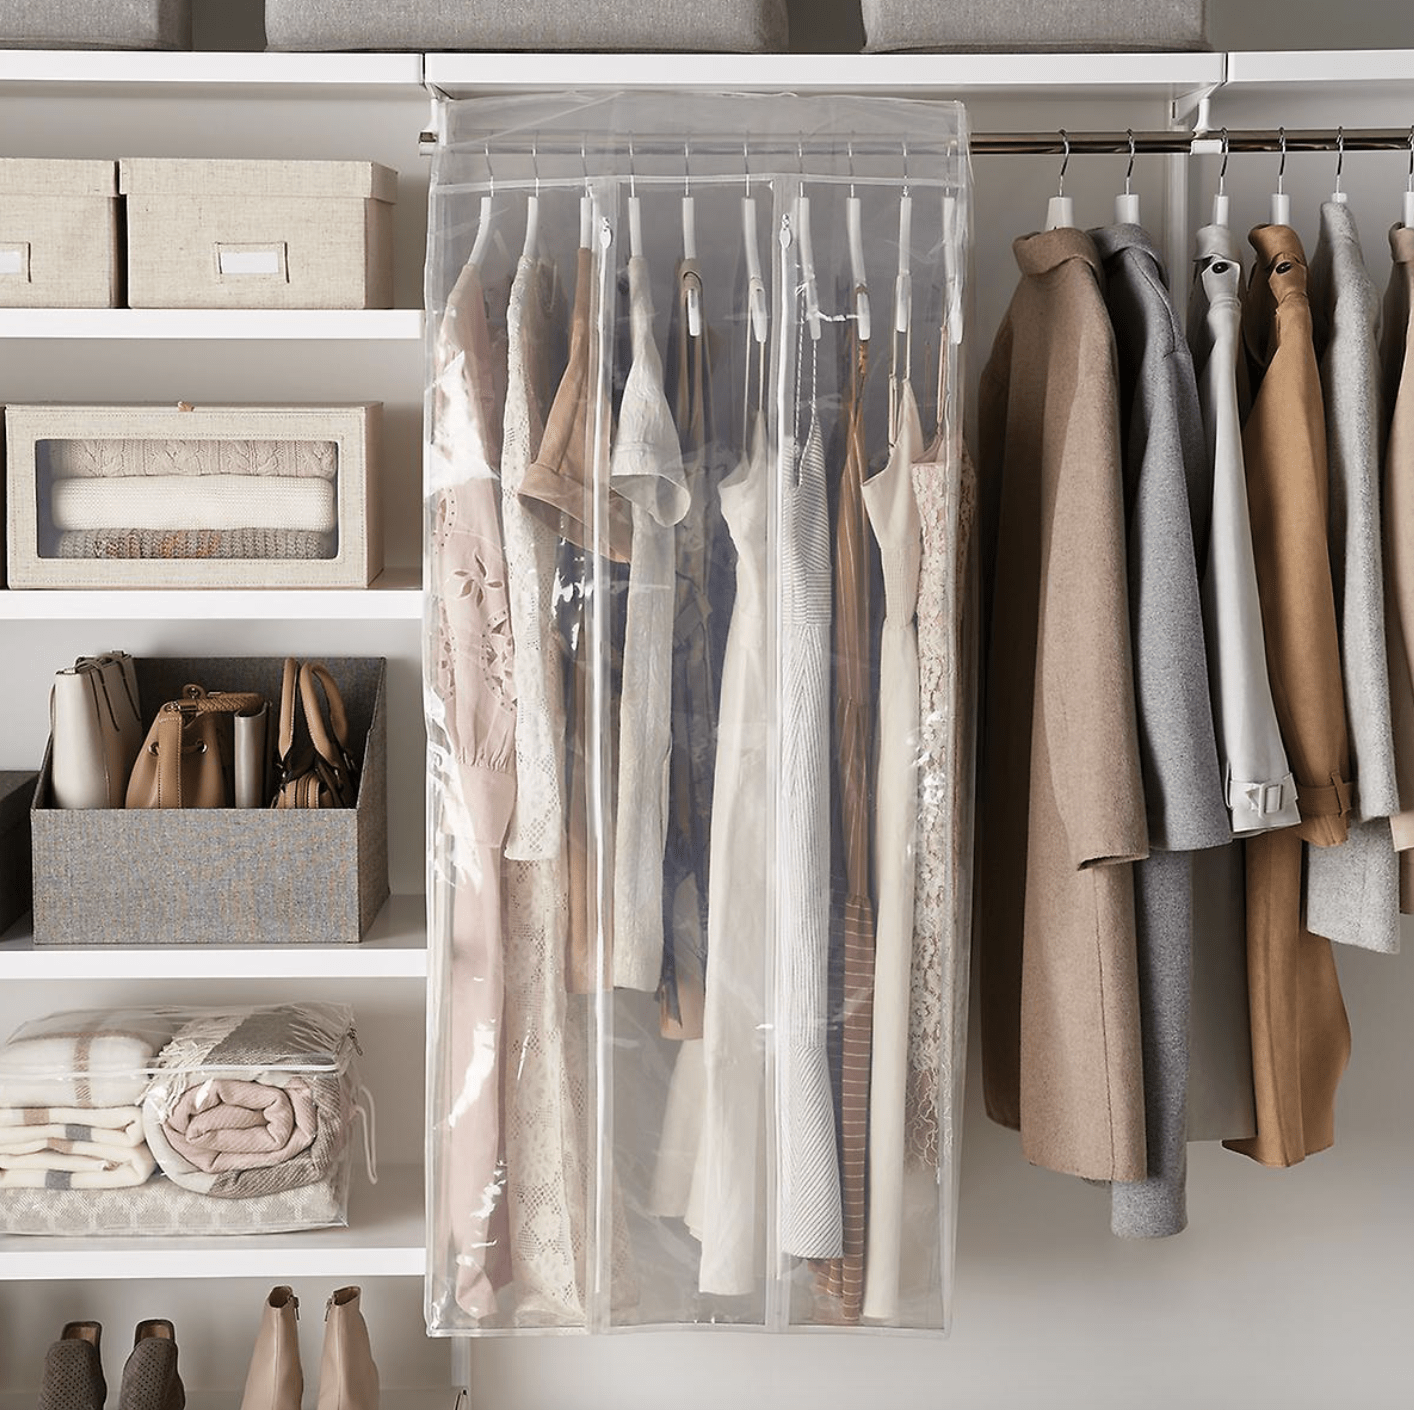 12 Tips for Supremely Organized Basement Storage